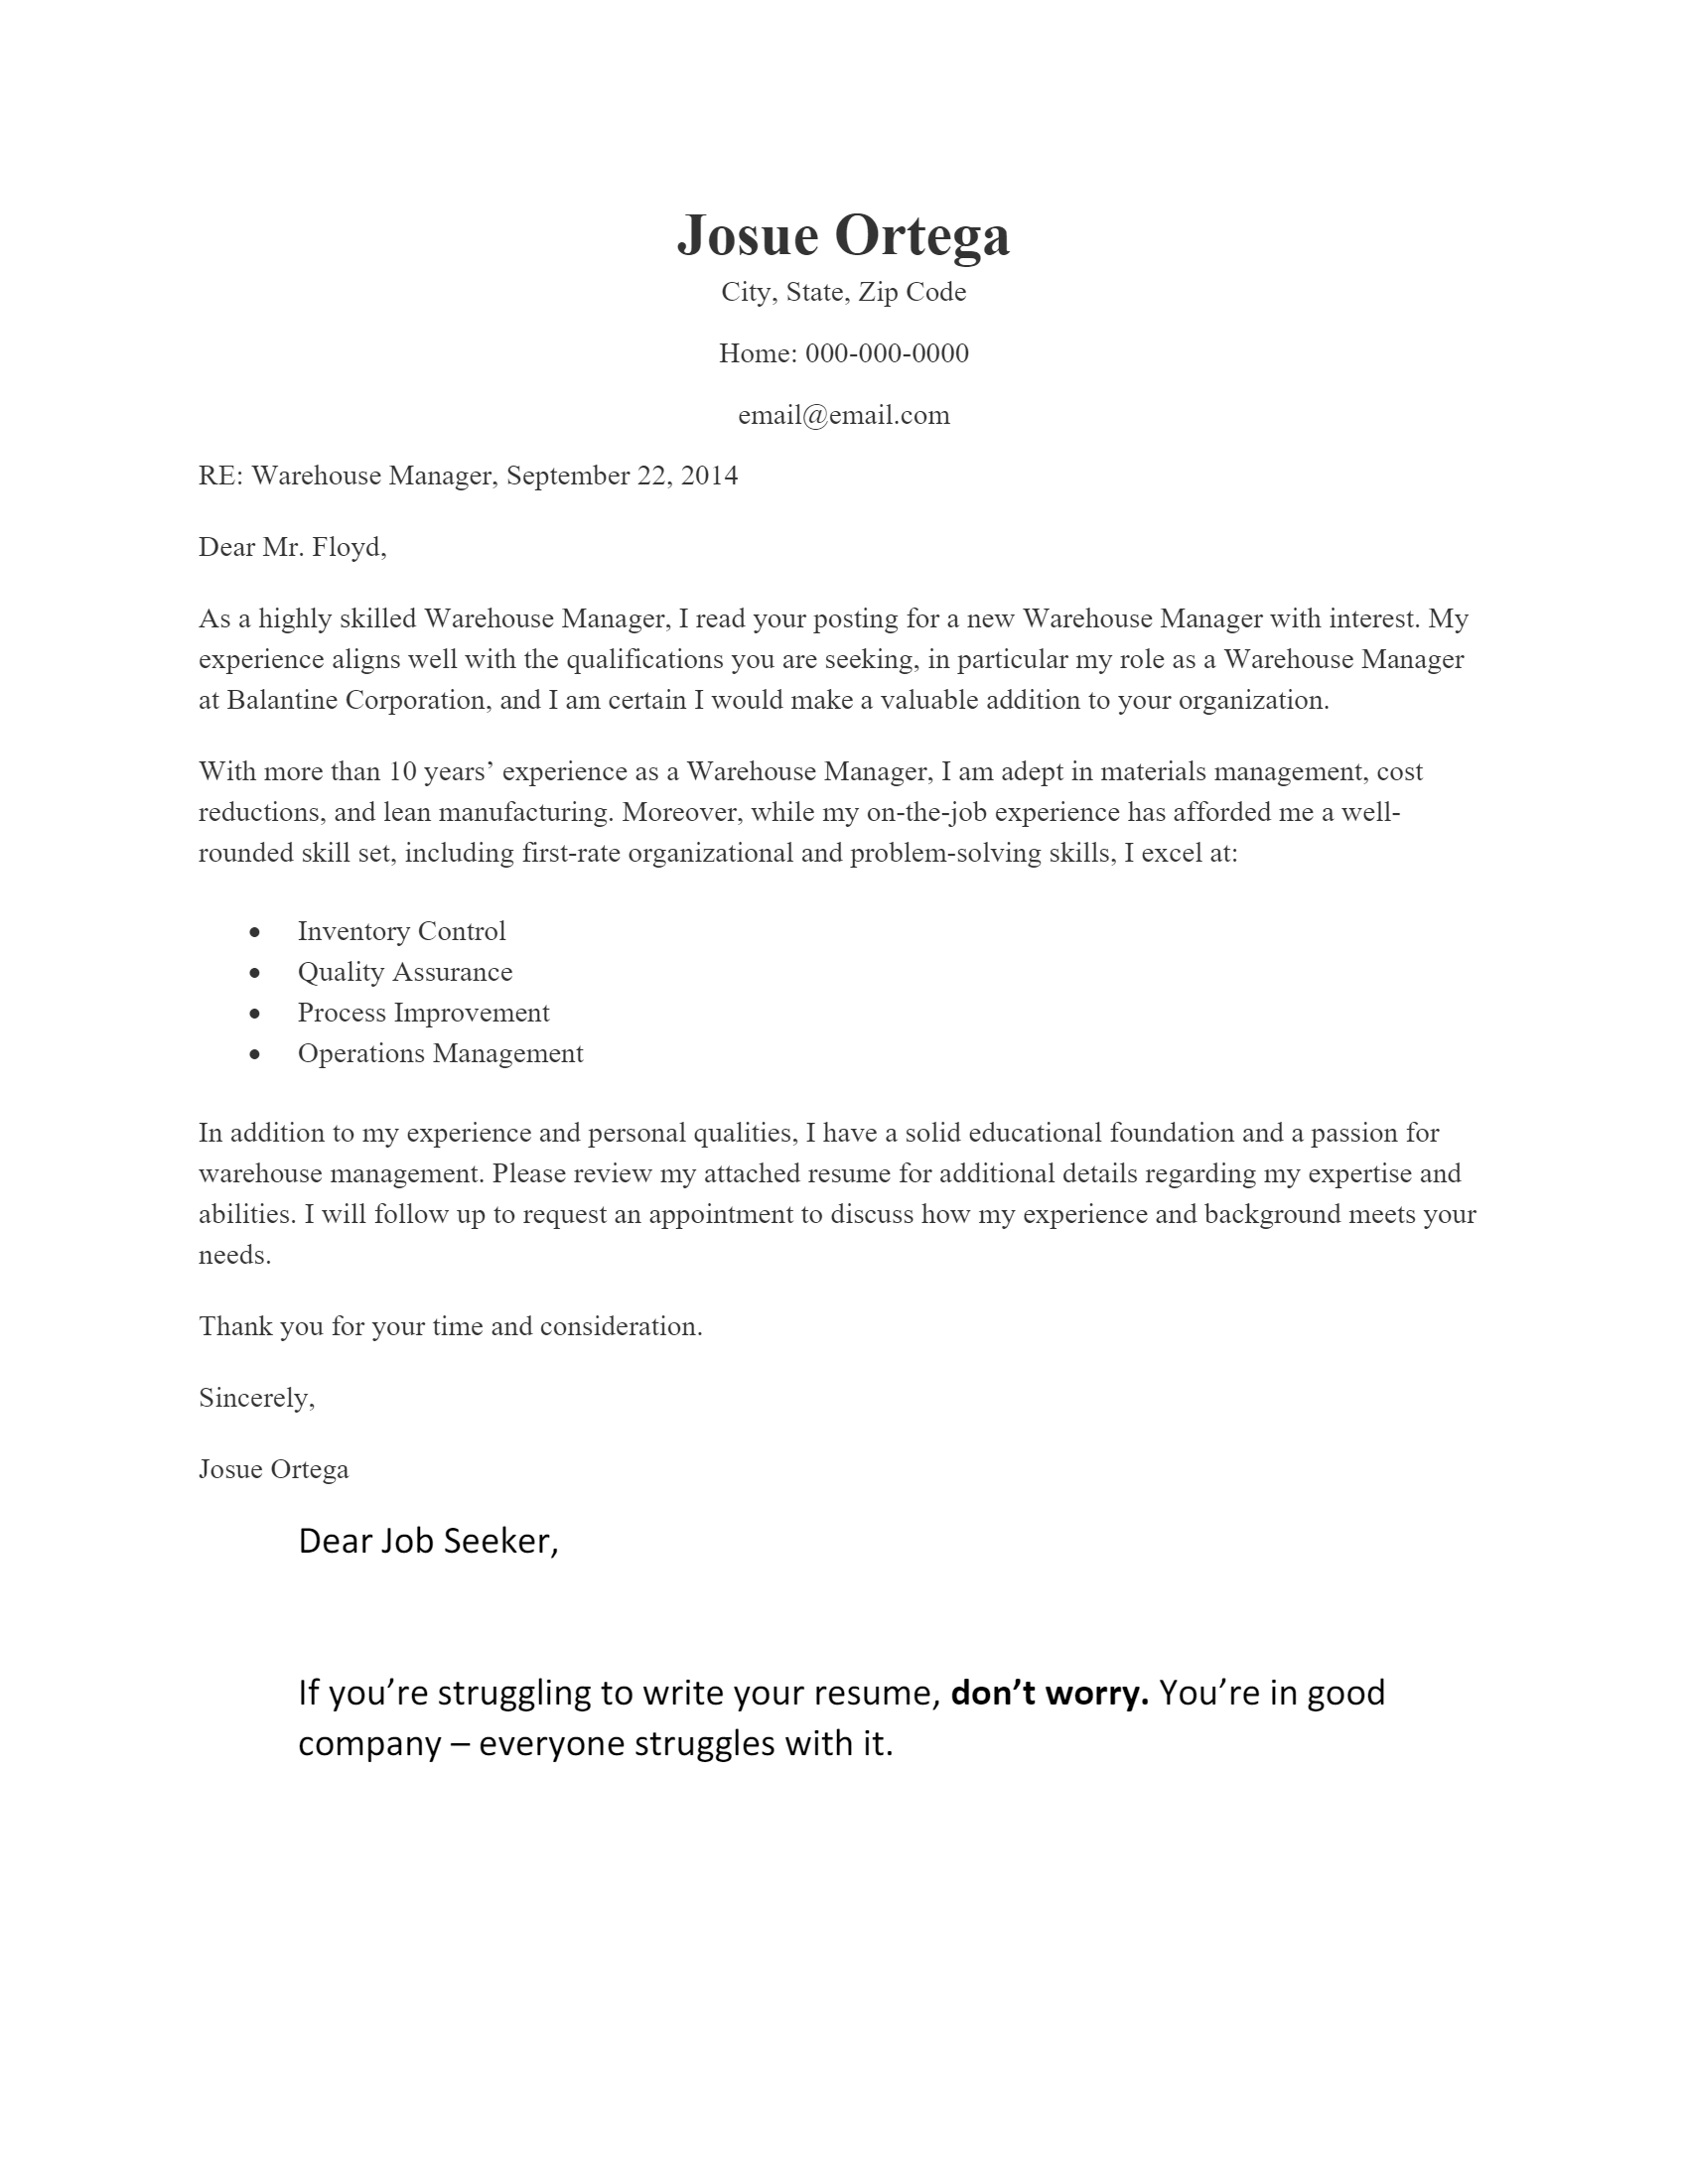 cover letters for warehouse jobs